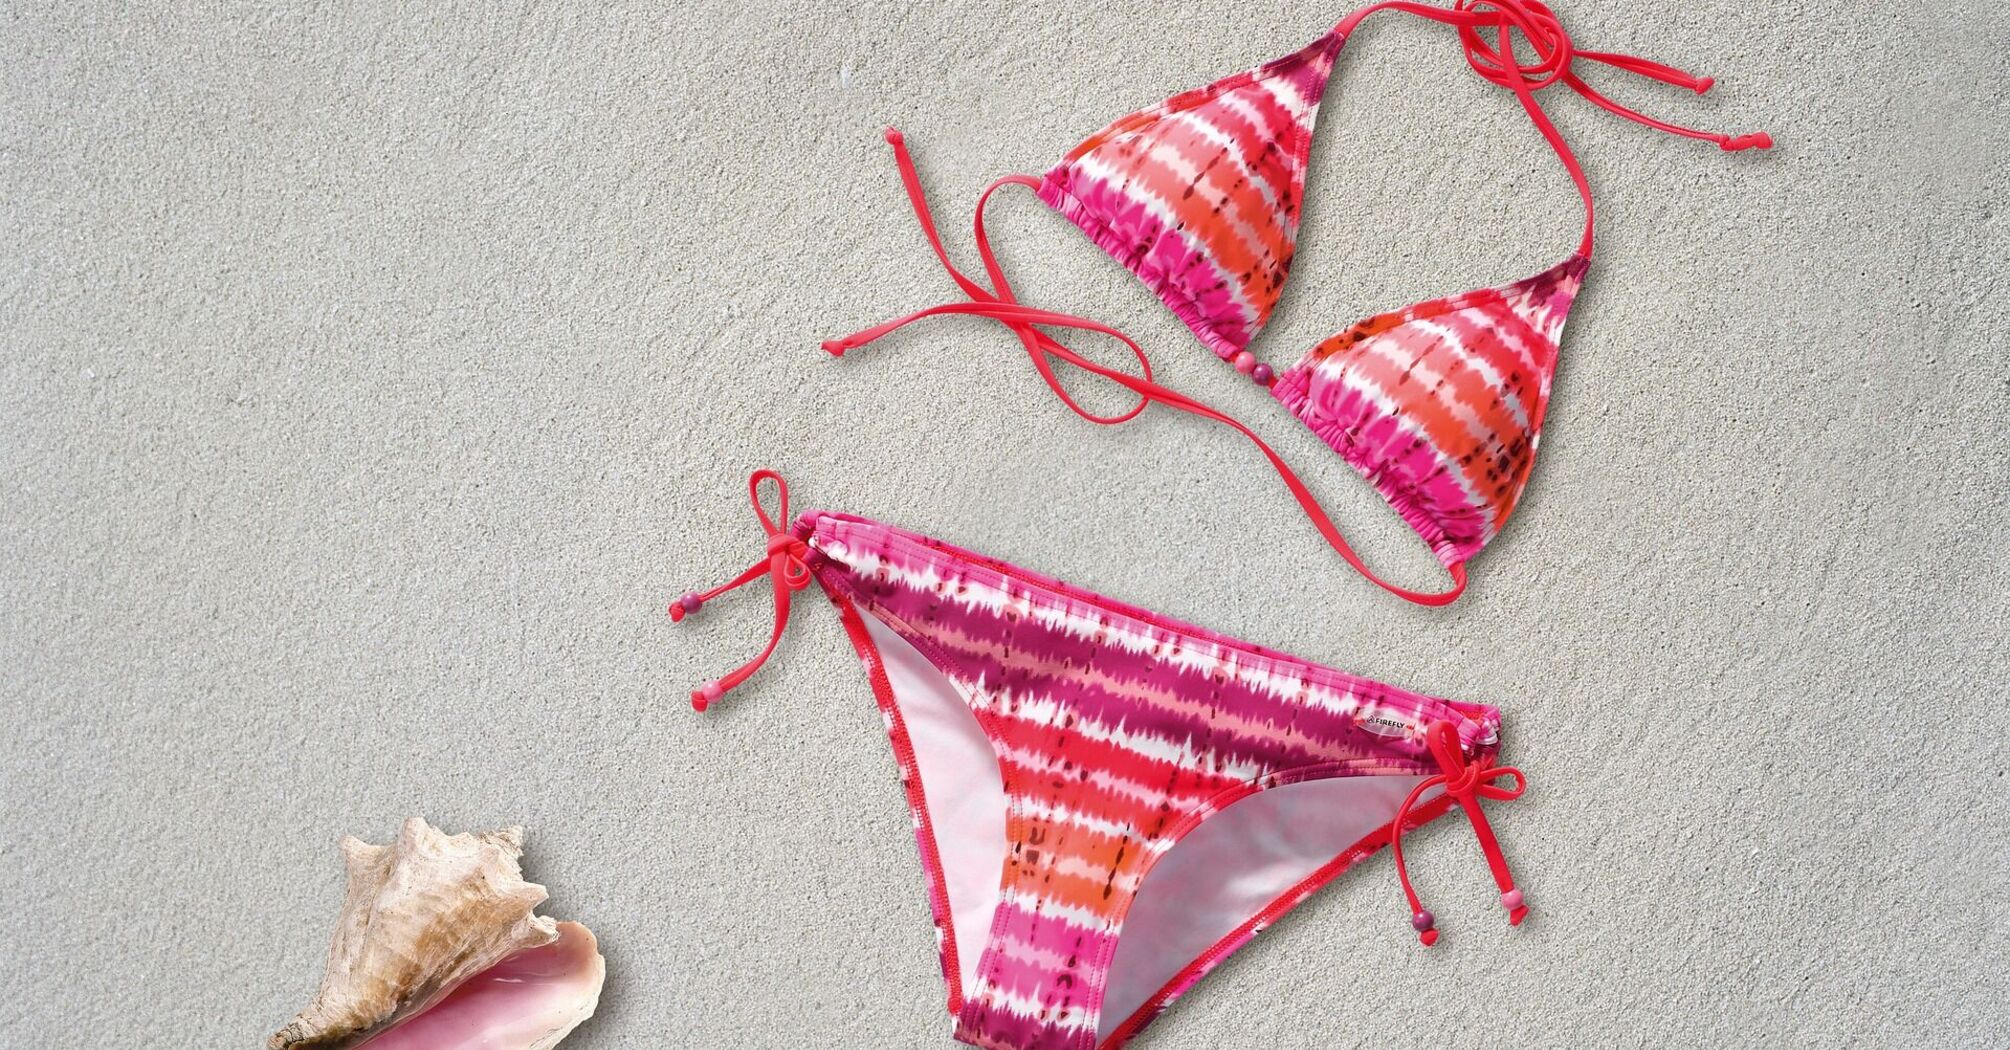 A pink and orange tie-dye bikini with string ties, laid out on a sandy surface alongside a conch shell and a seashell